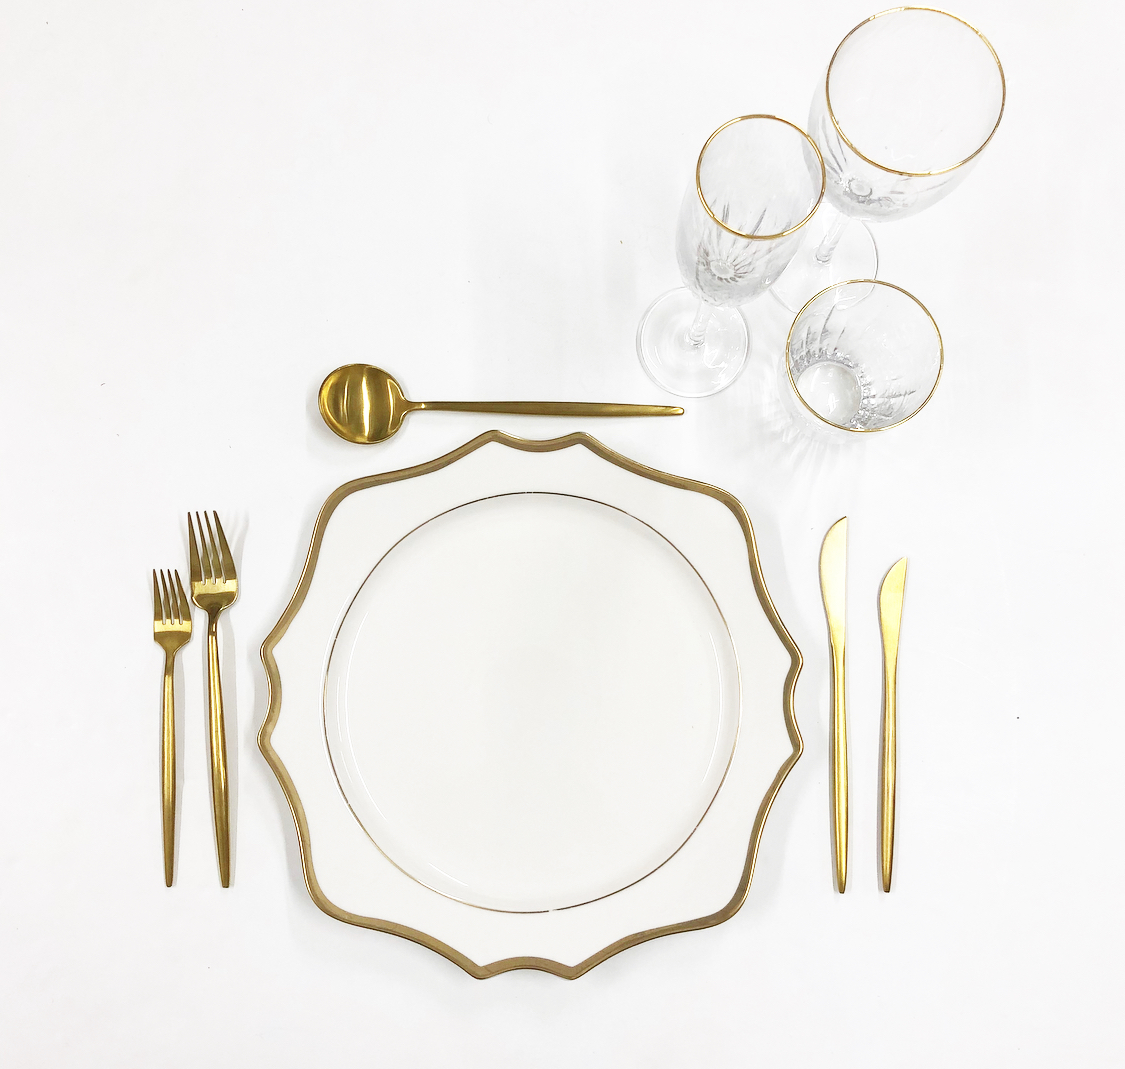 White & Gold – Ornate Charger Package